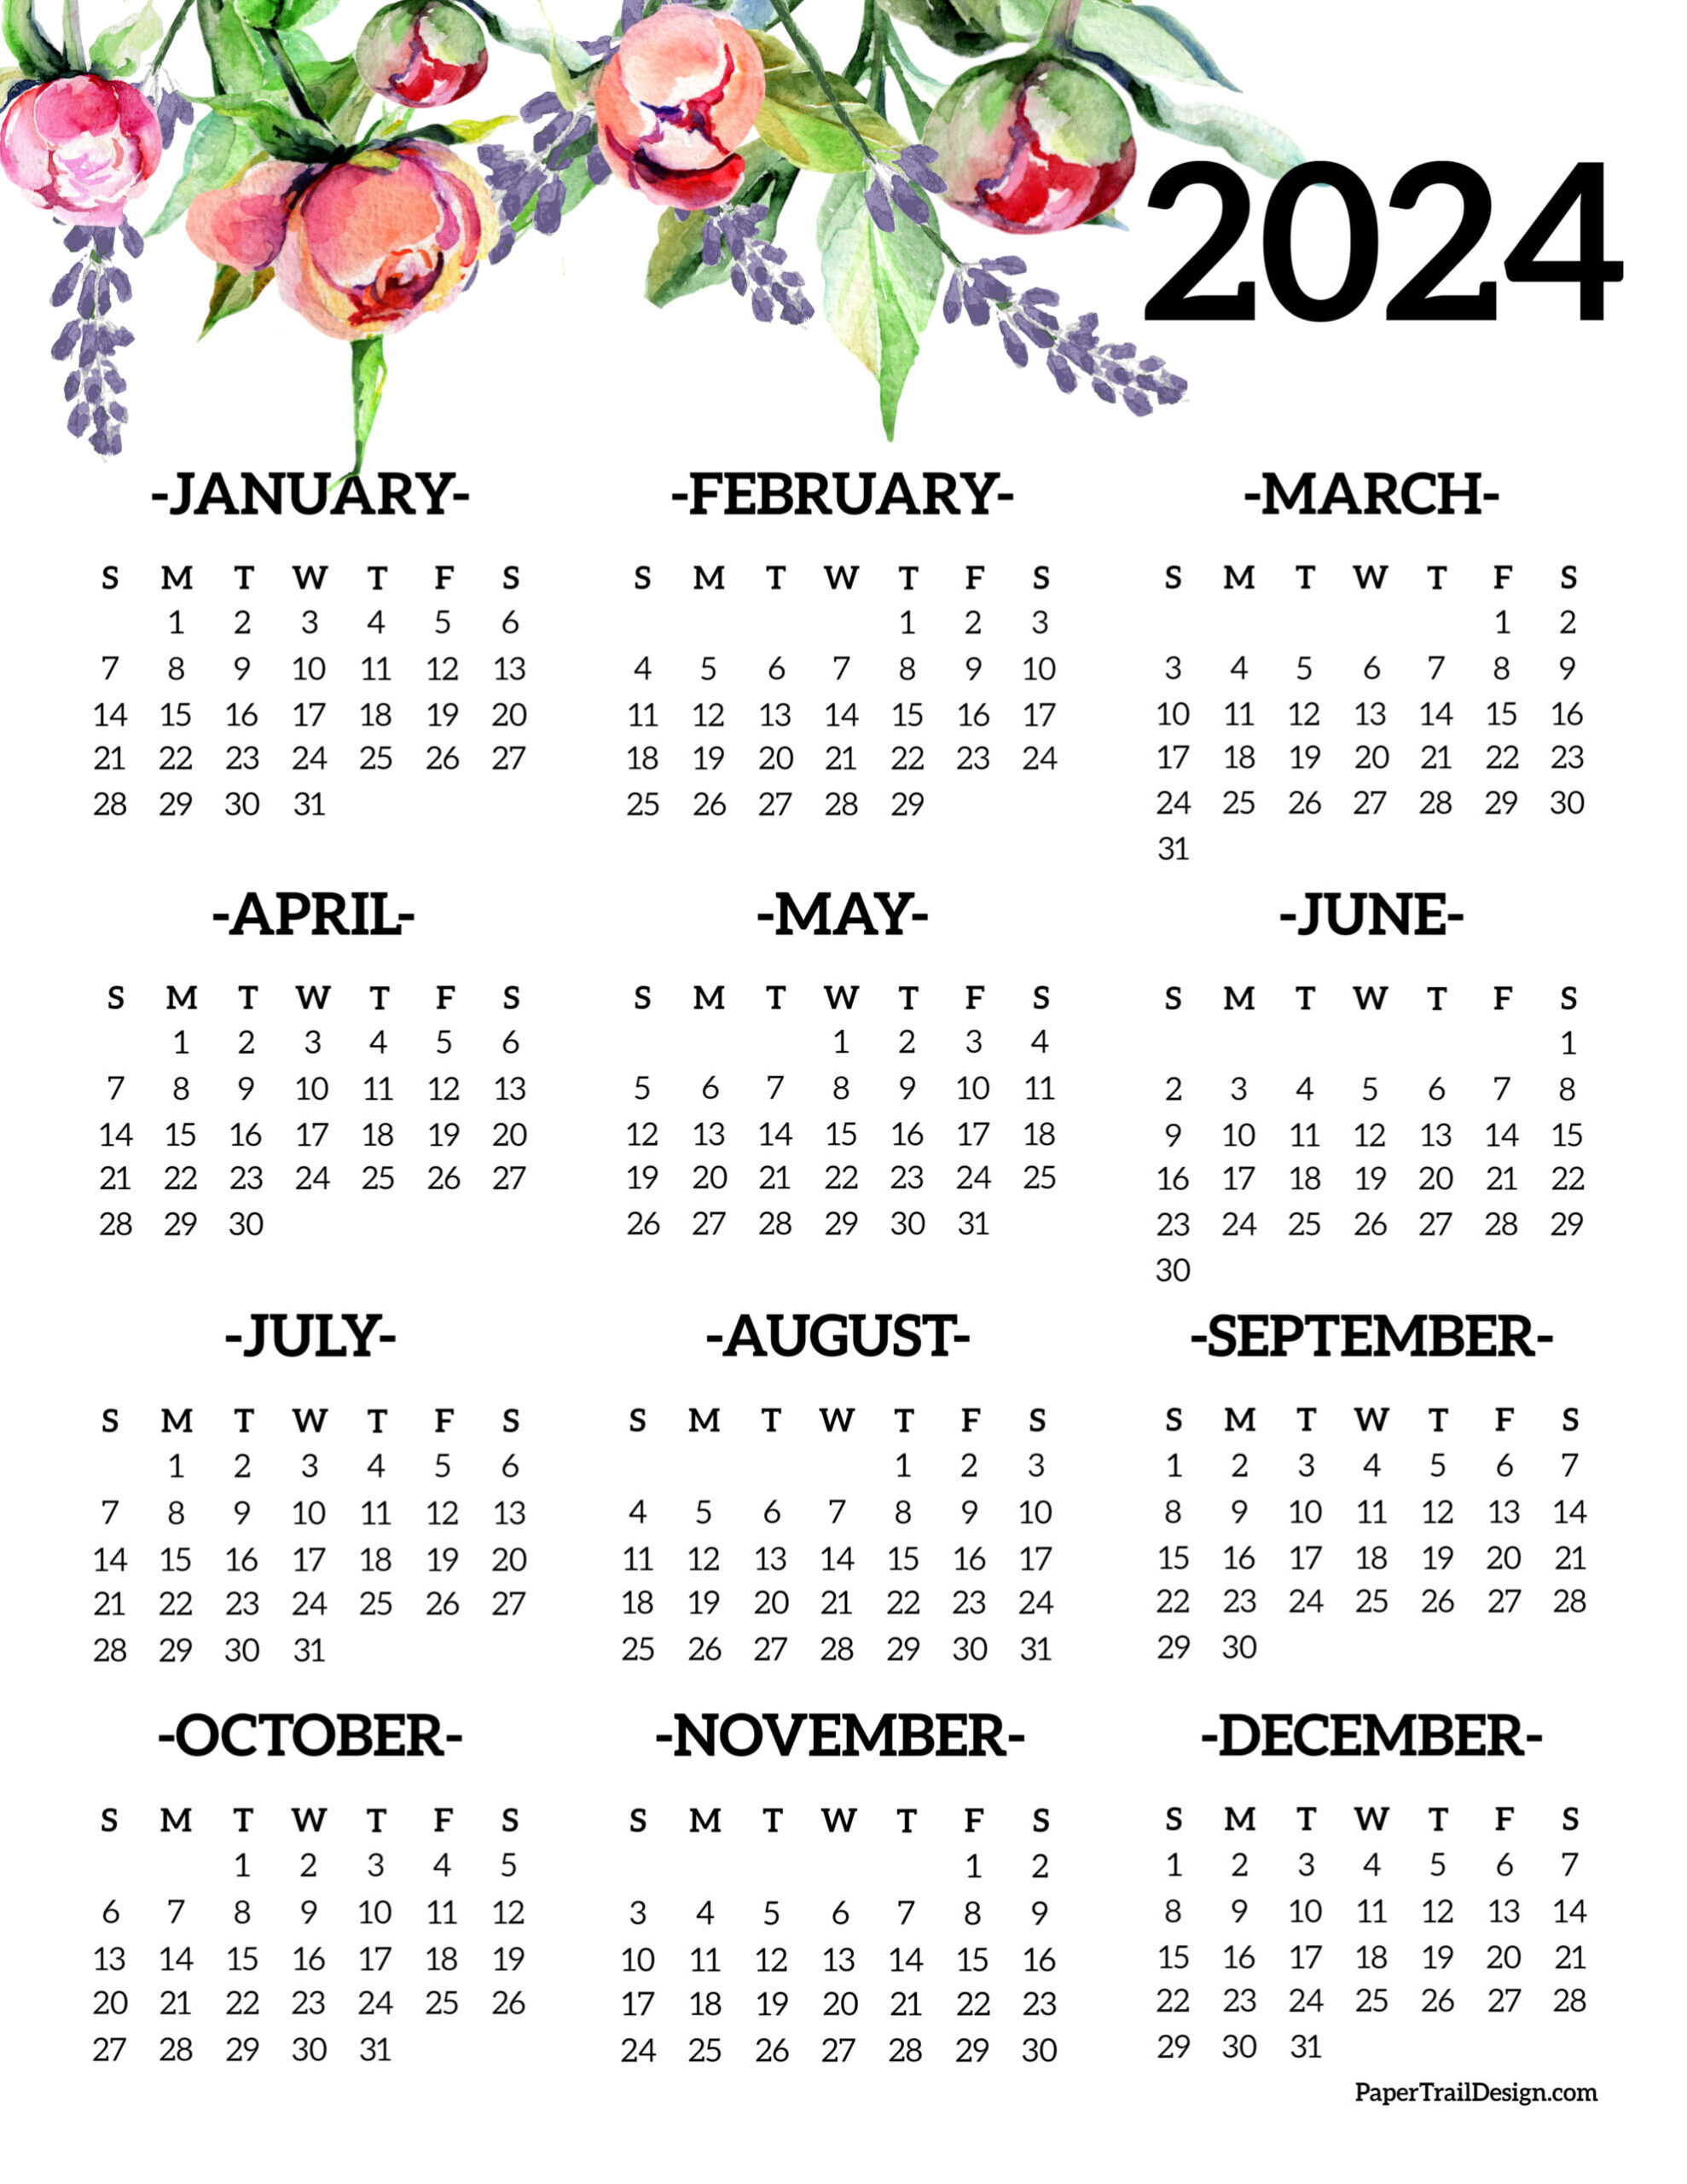 Calendar 2024 Printable One Page - Paper Trail Design for 2024 Yearly Calendar Printable One Page